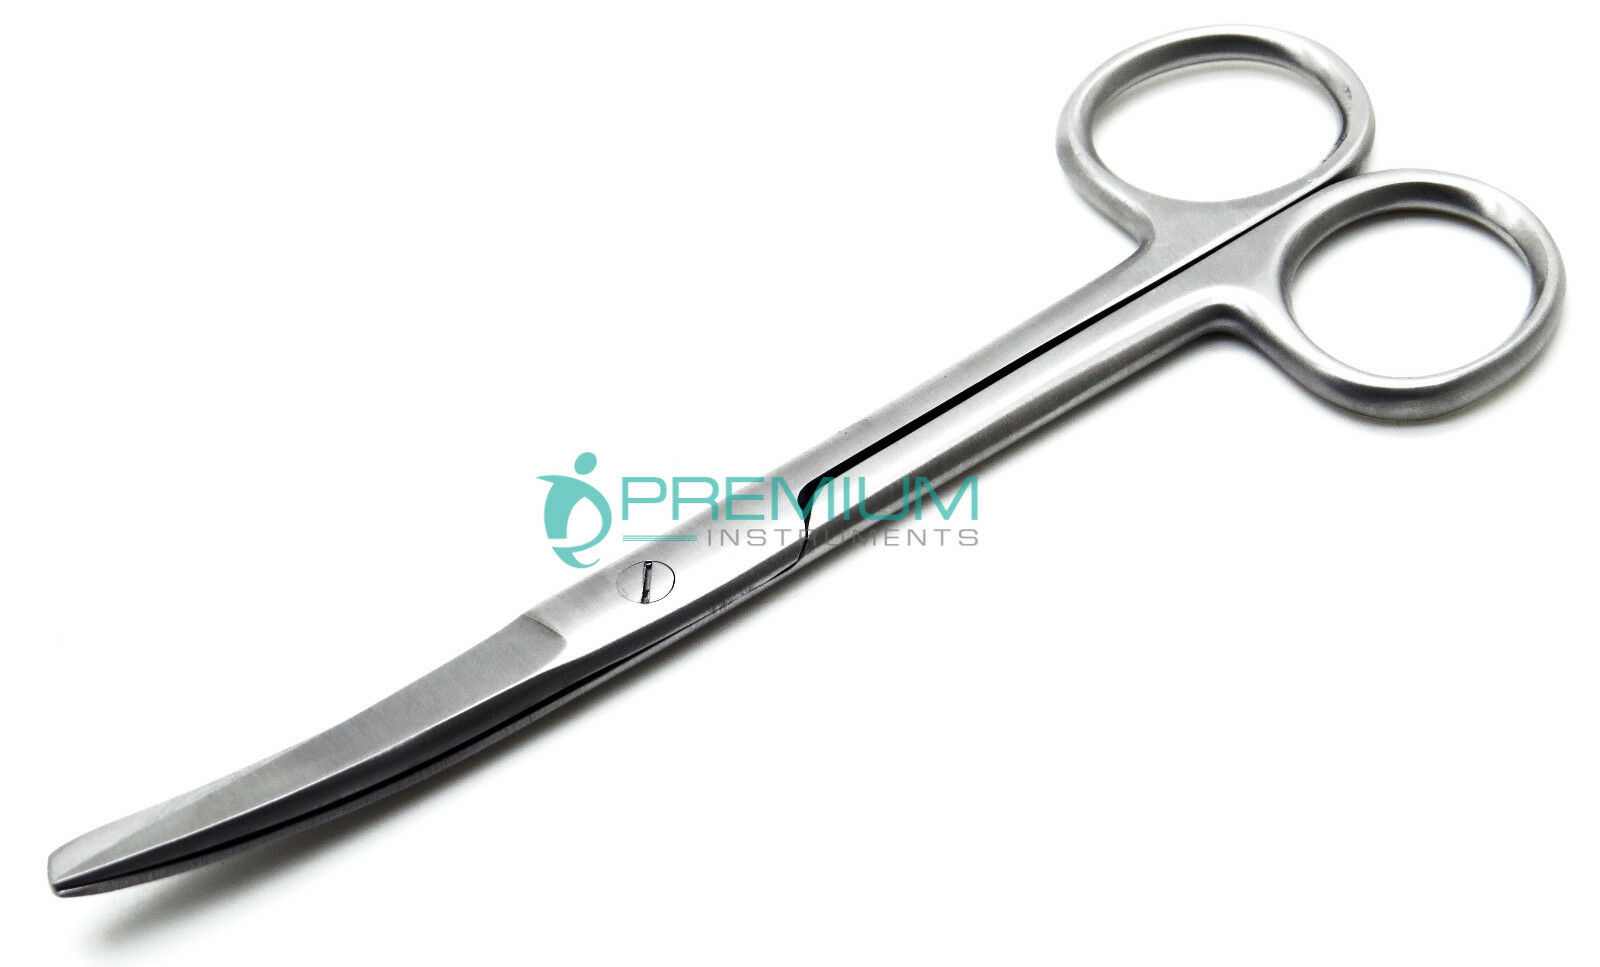 Surgical Operating Medical Mayo Scissors Curved 5.5" Blunt/sharp Instruments